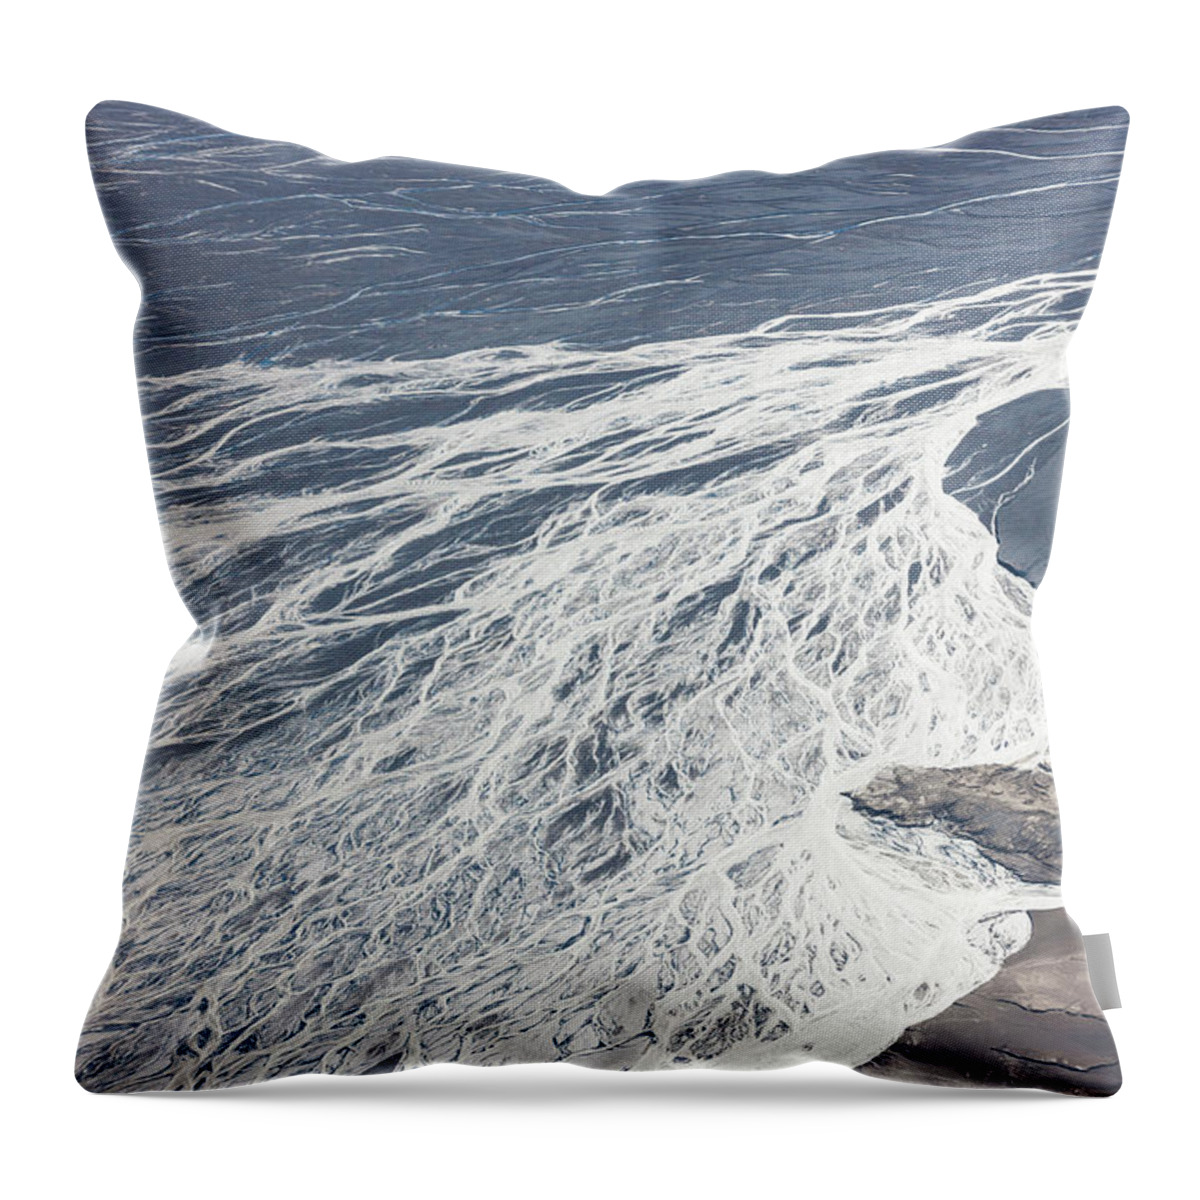 Water Throw Pillow featuring the photograph Aerial View Of River System by Guðmundur Tómasson